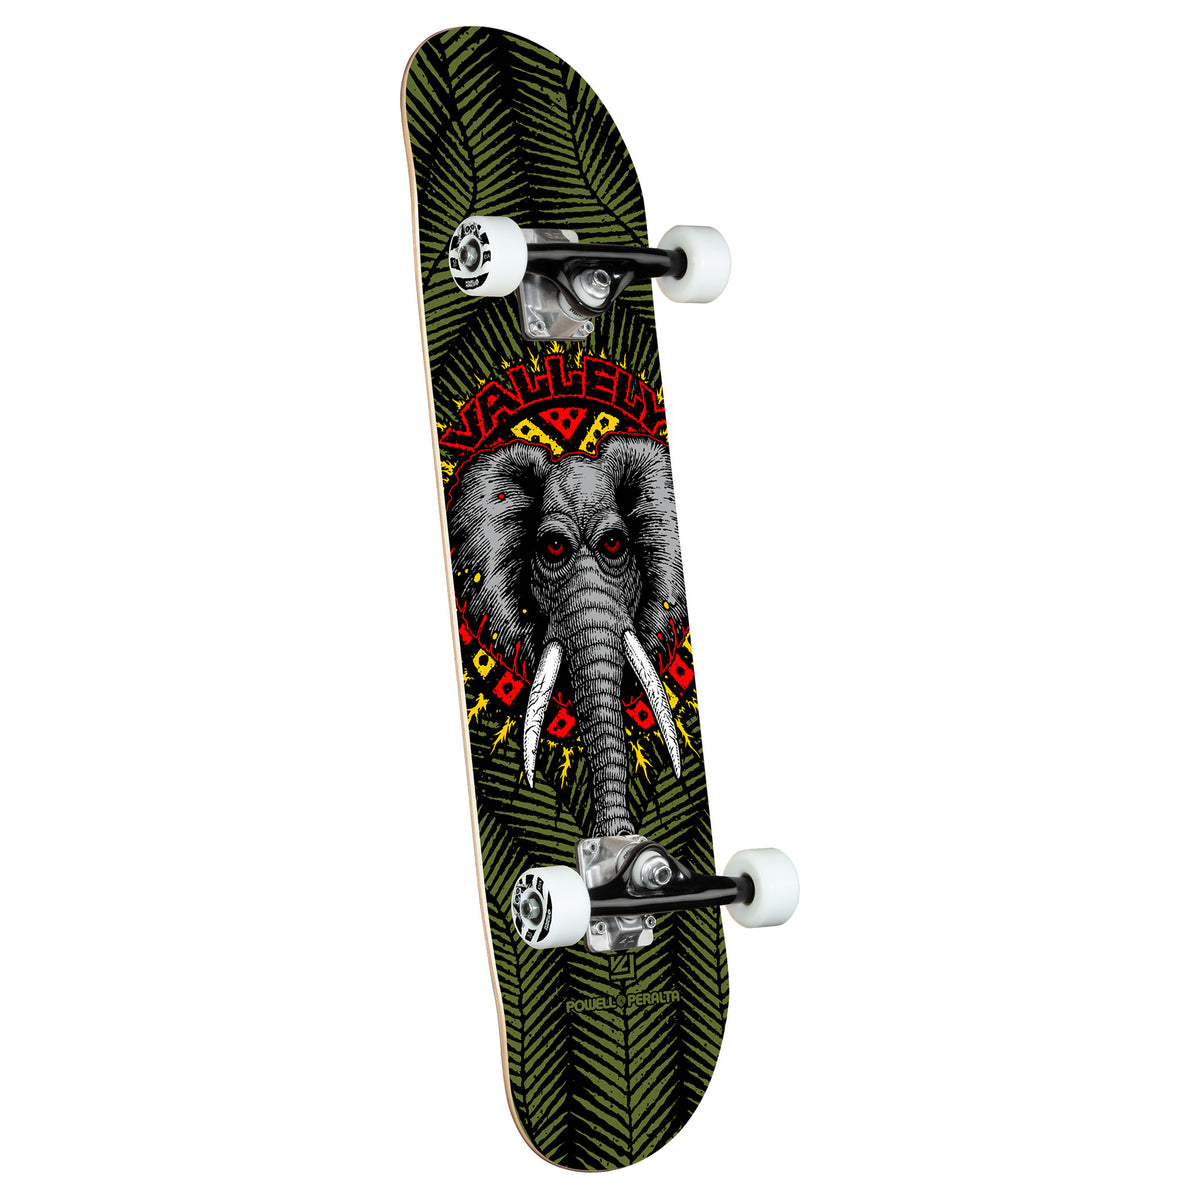 POWELL PERALTA VALLELY ELEPHANT COMPLETE OLIVE– Bluetile Skateboards